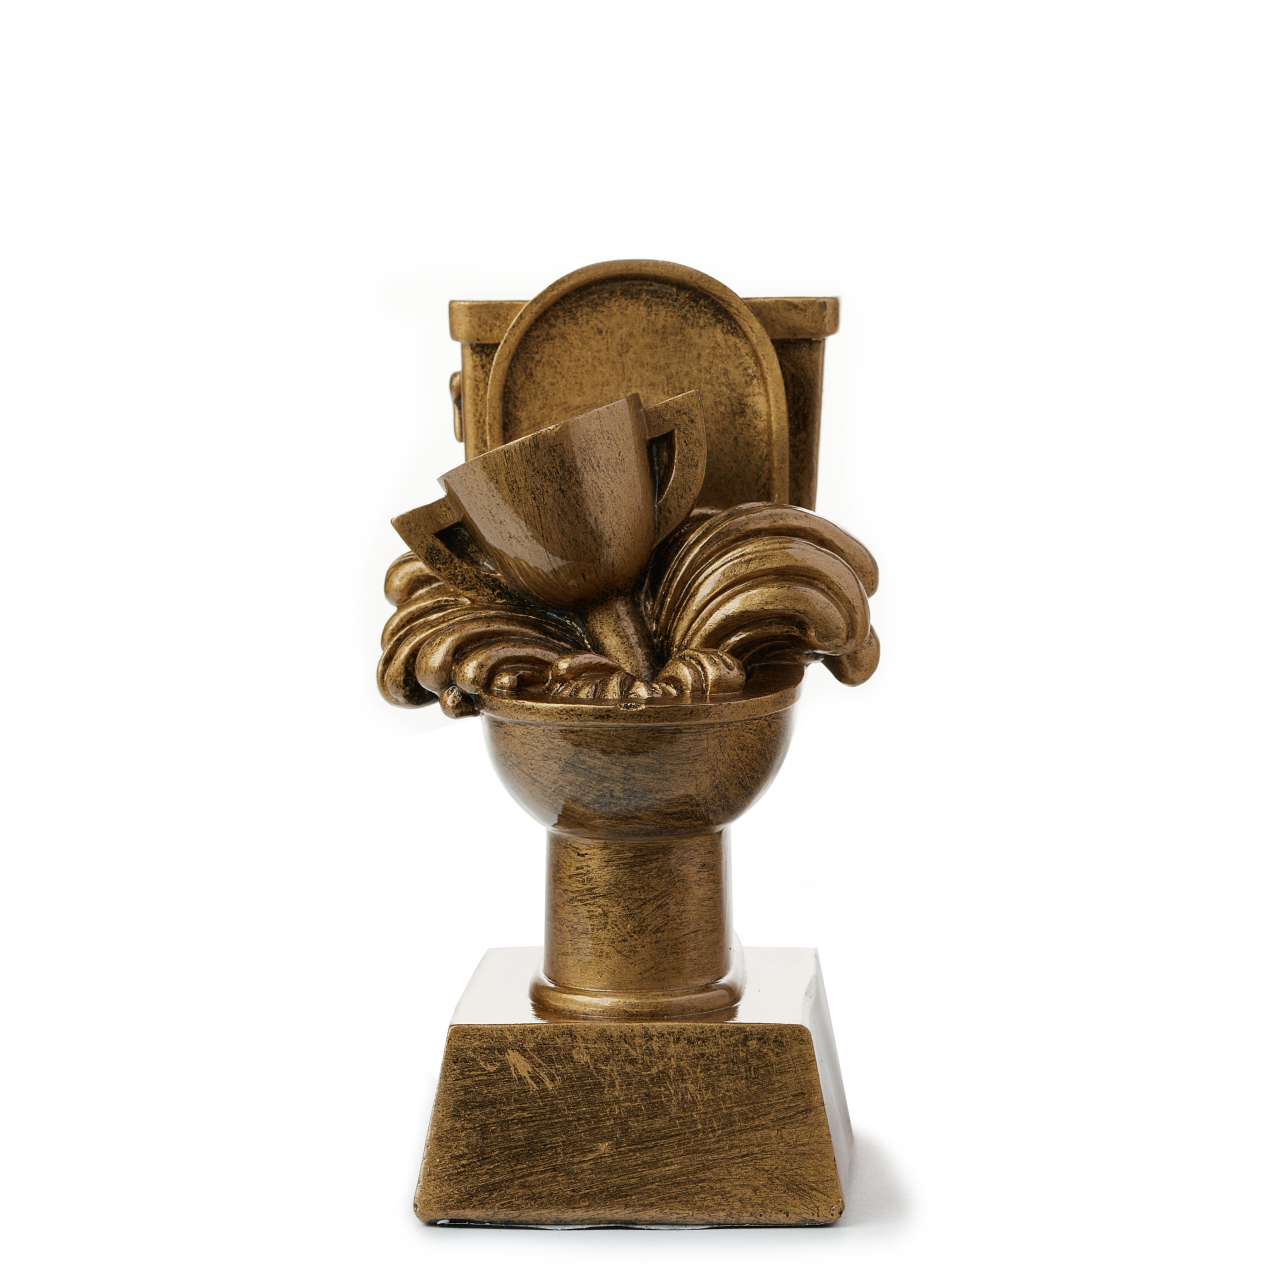 Fantasy Football Trophy | Toilet Bowl Design | Last Place Award for League or Team | Available in 1 Size